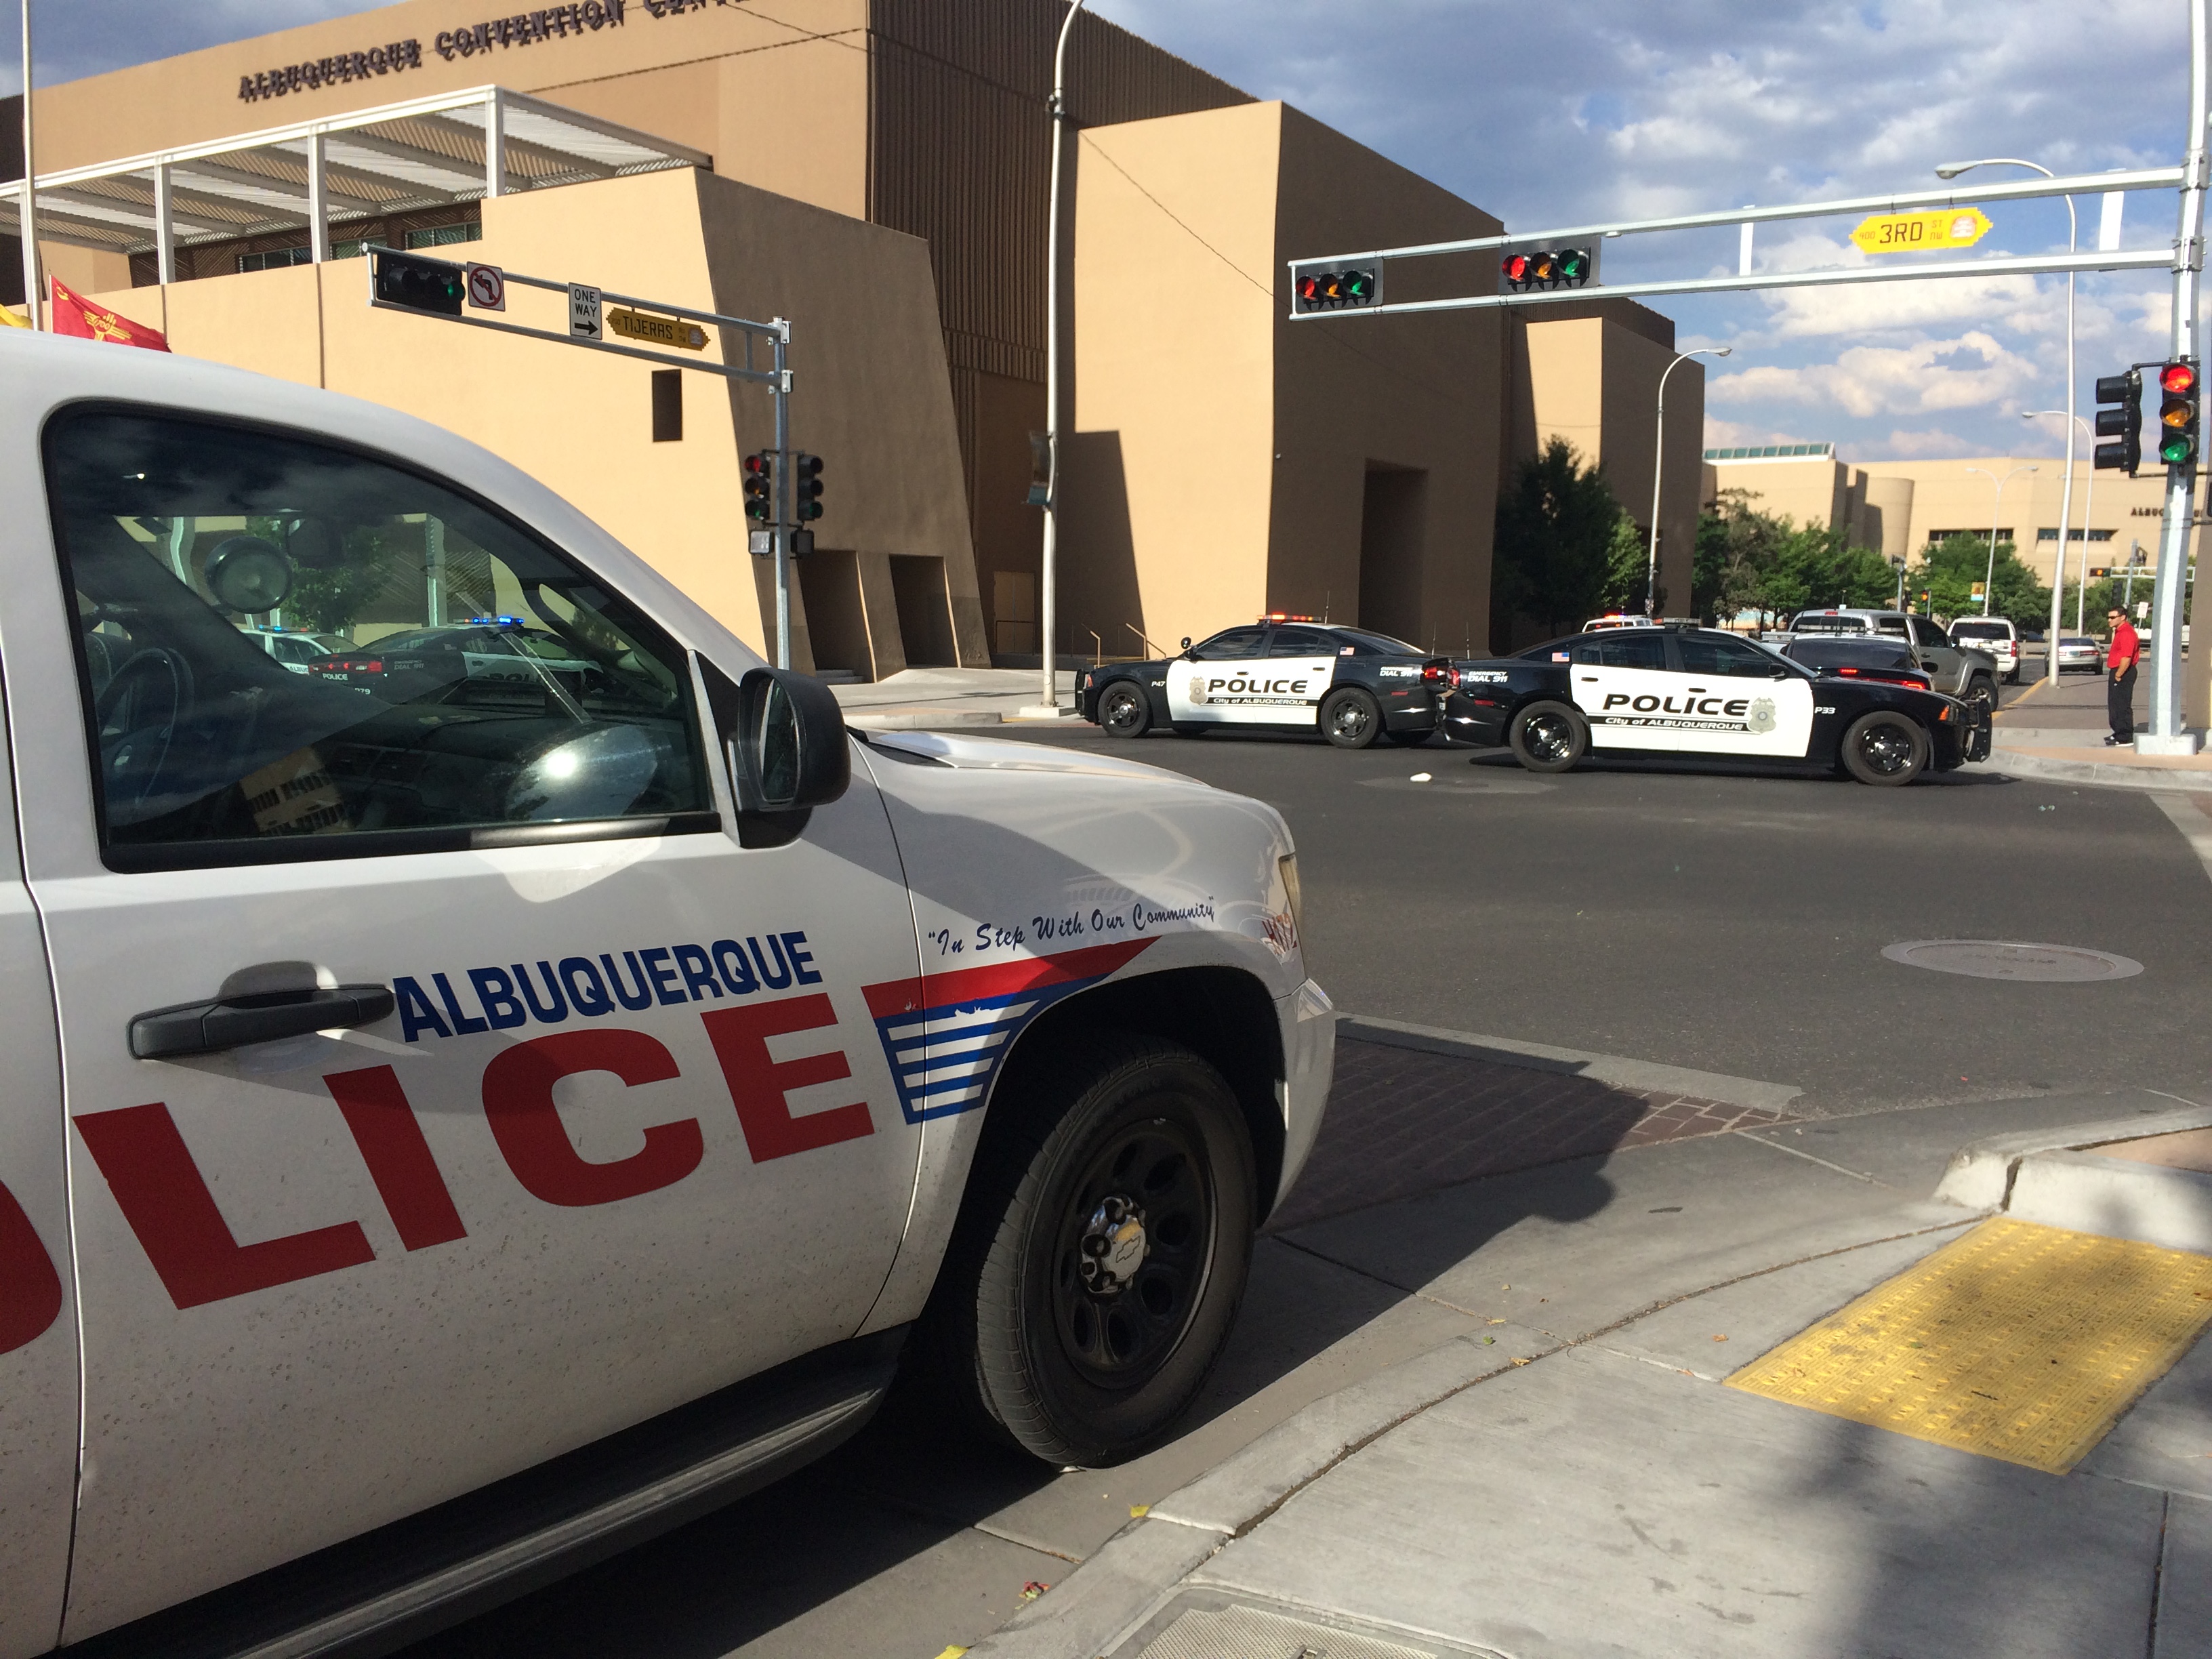 Reports of shooter, hostage situation in Albuquerque